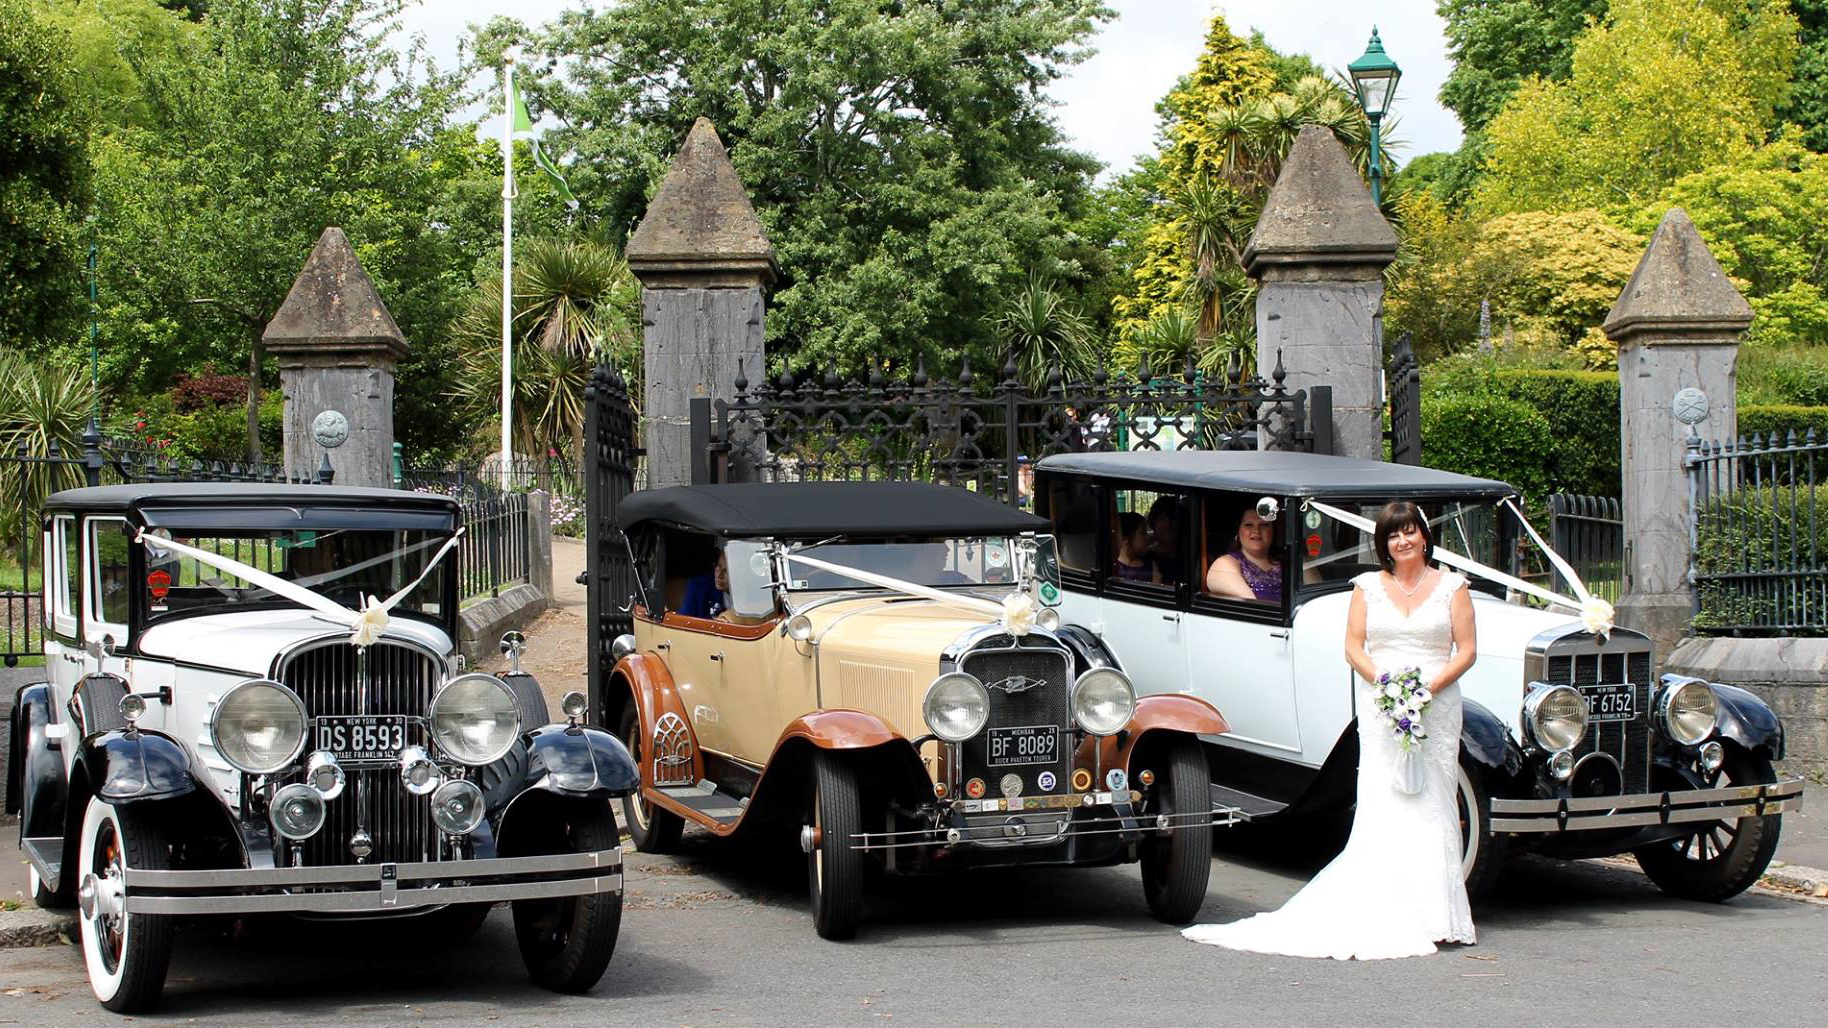 Two vintage wedding cars decorated with white ribbons at a local Bude wedding. Both vehicles are parked side-by-side